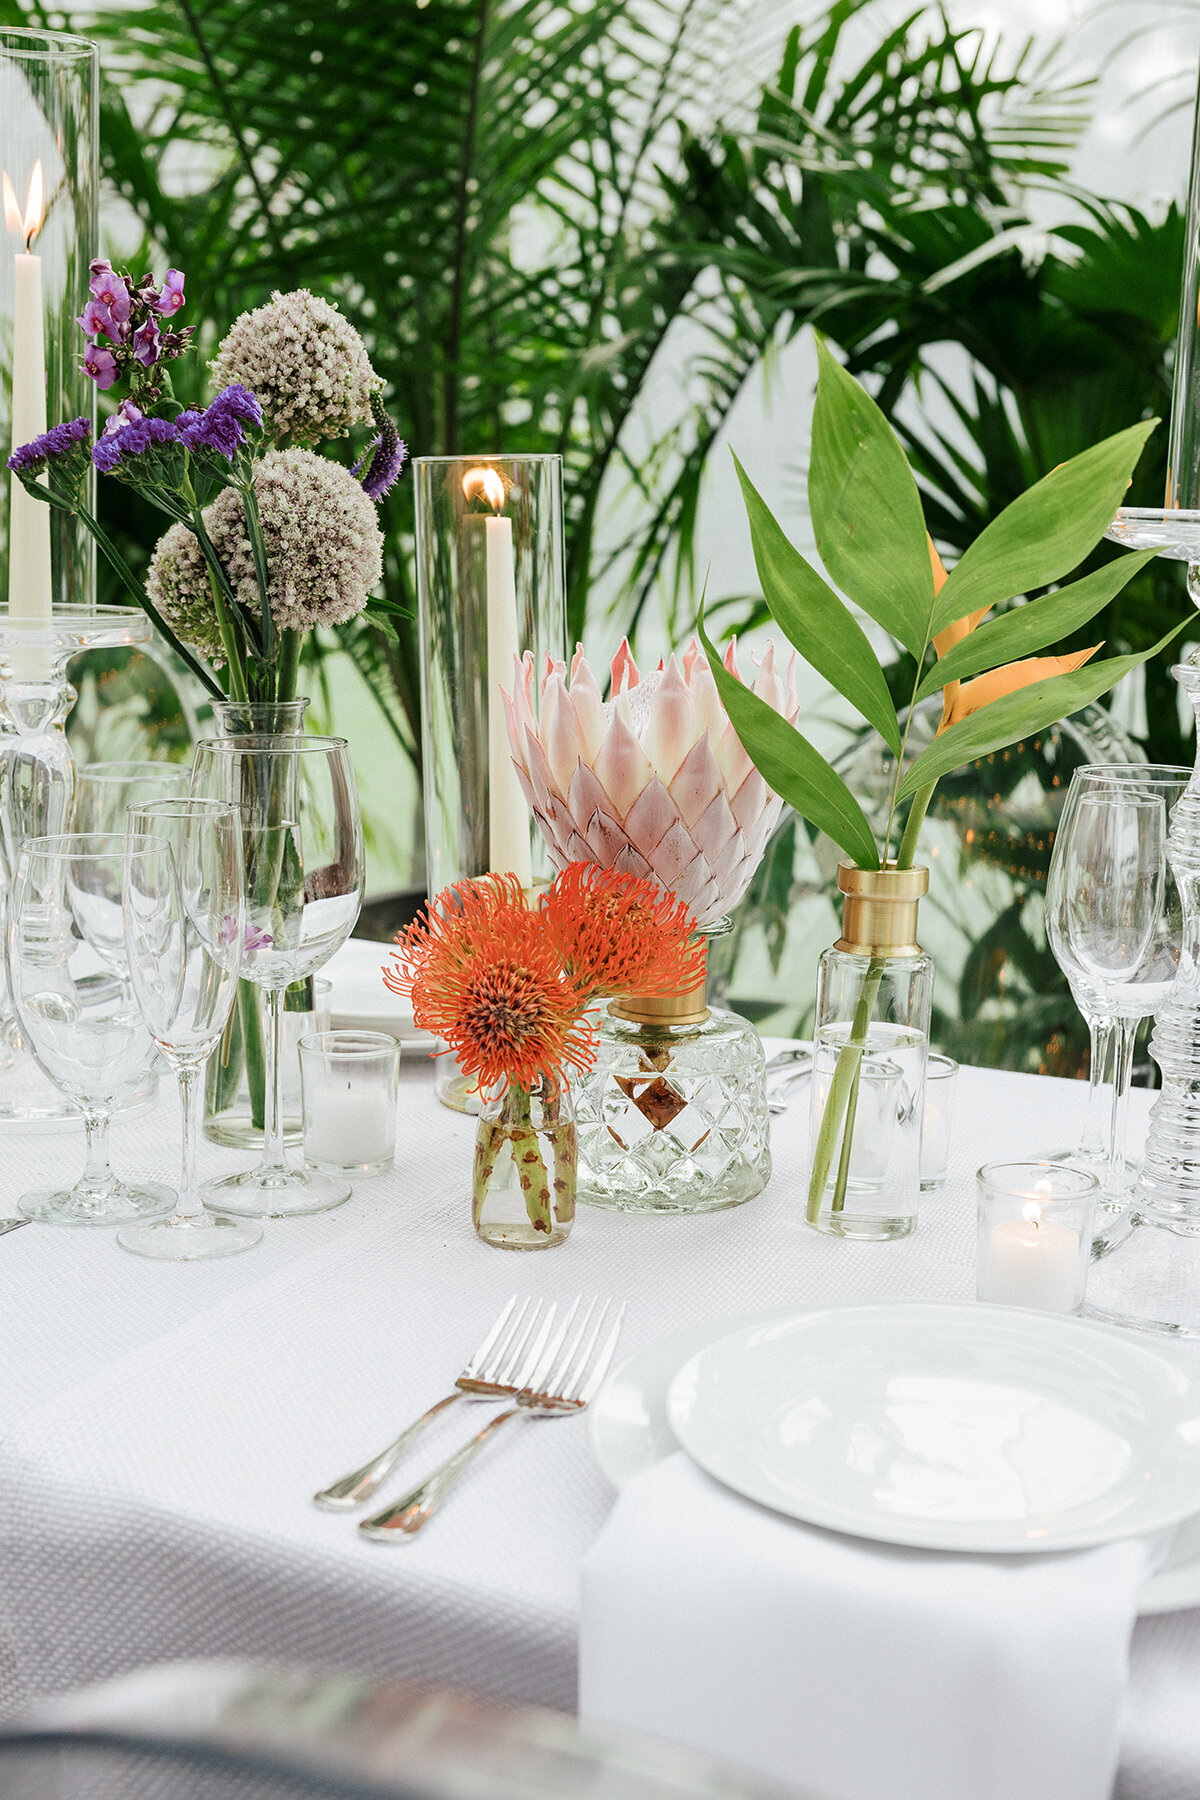 Sumner + Scott - New Orleans Museum of Art Wedding - Luxury Event Planning by Michelle Norwood - 42